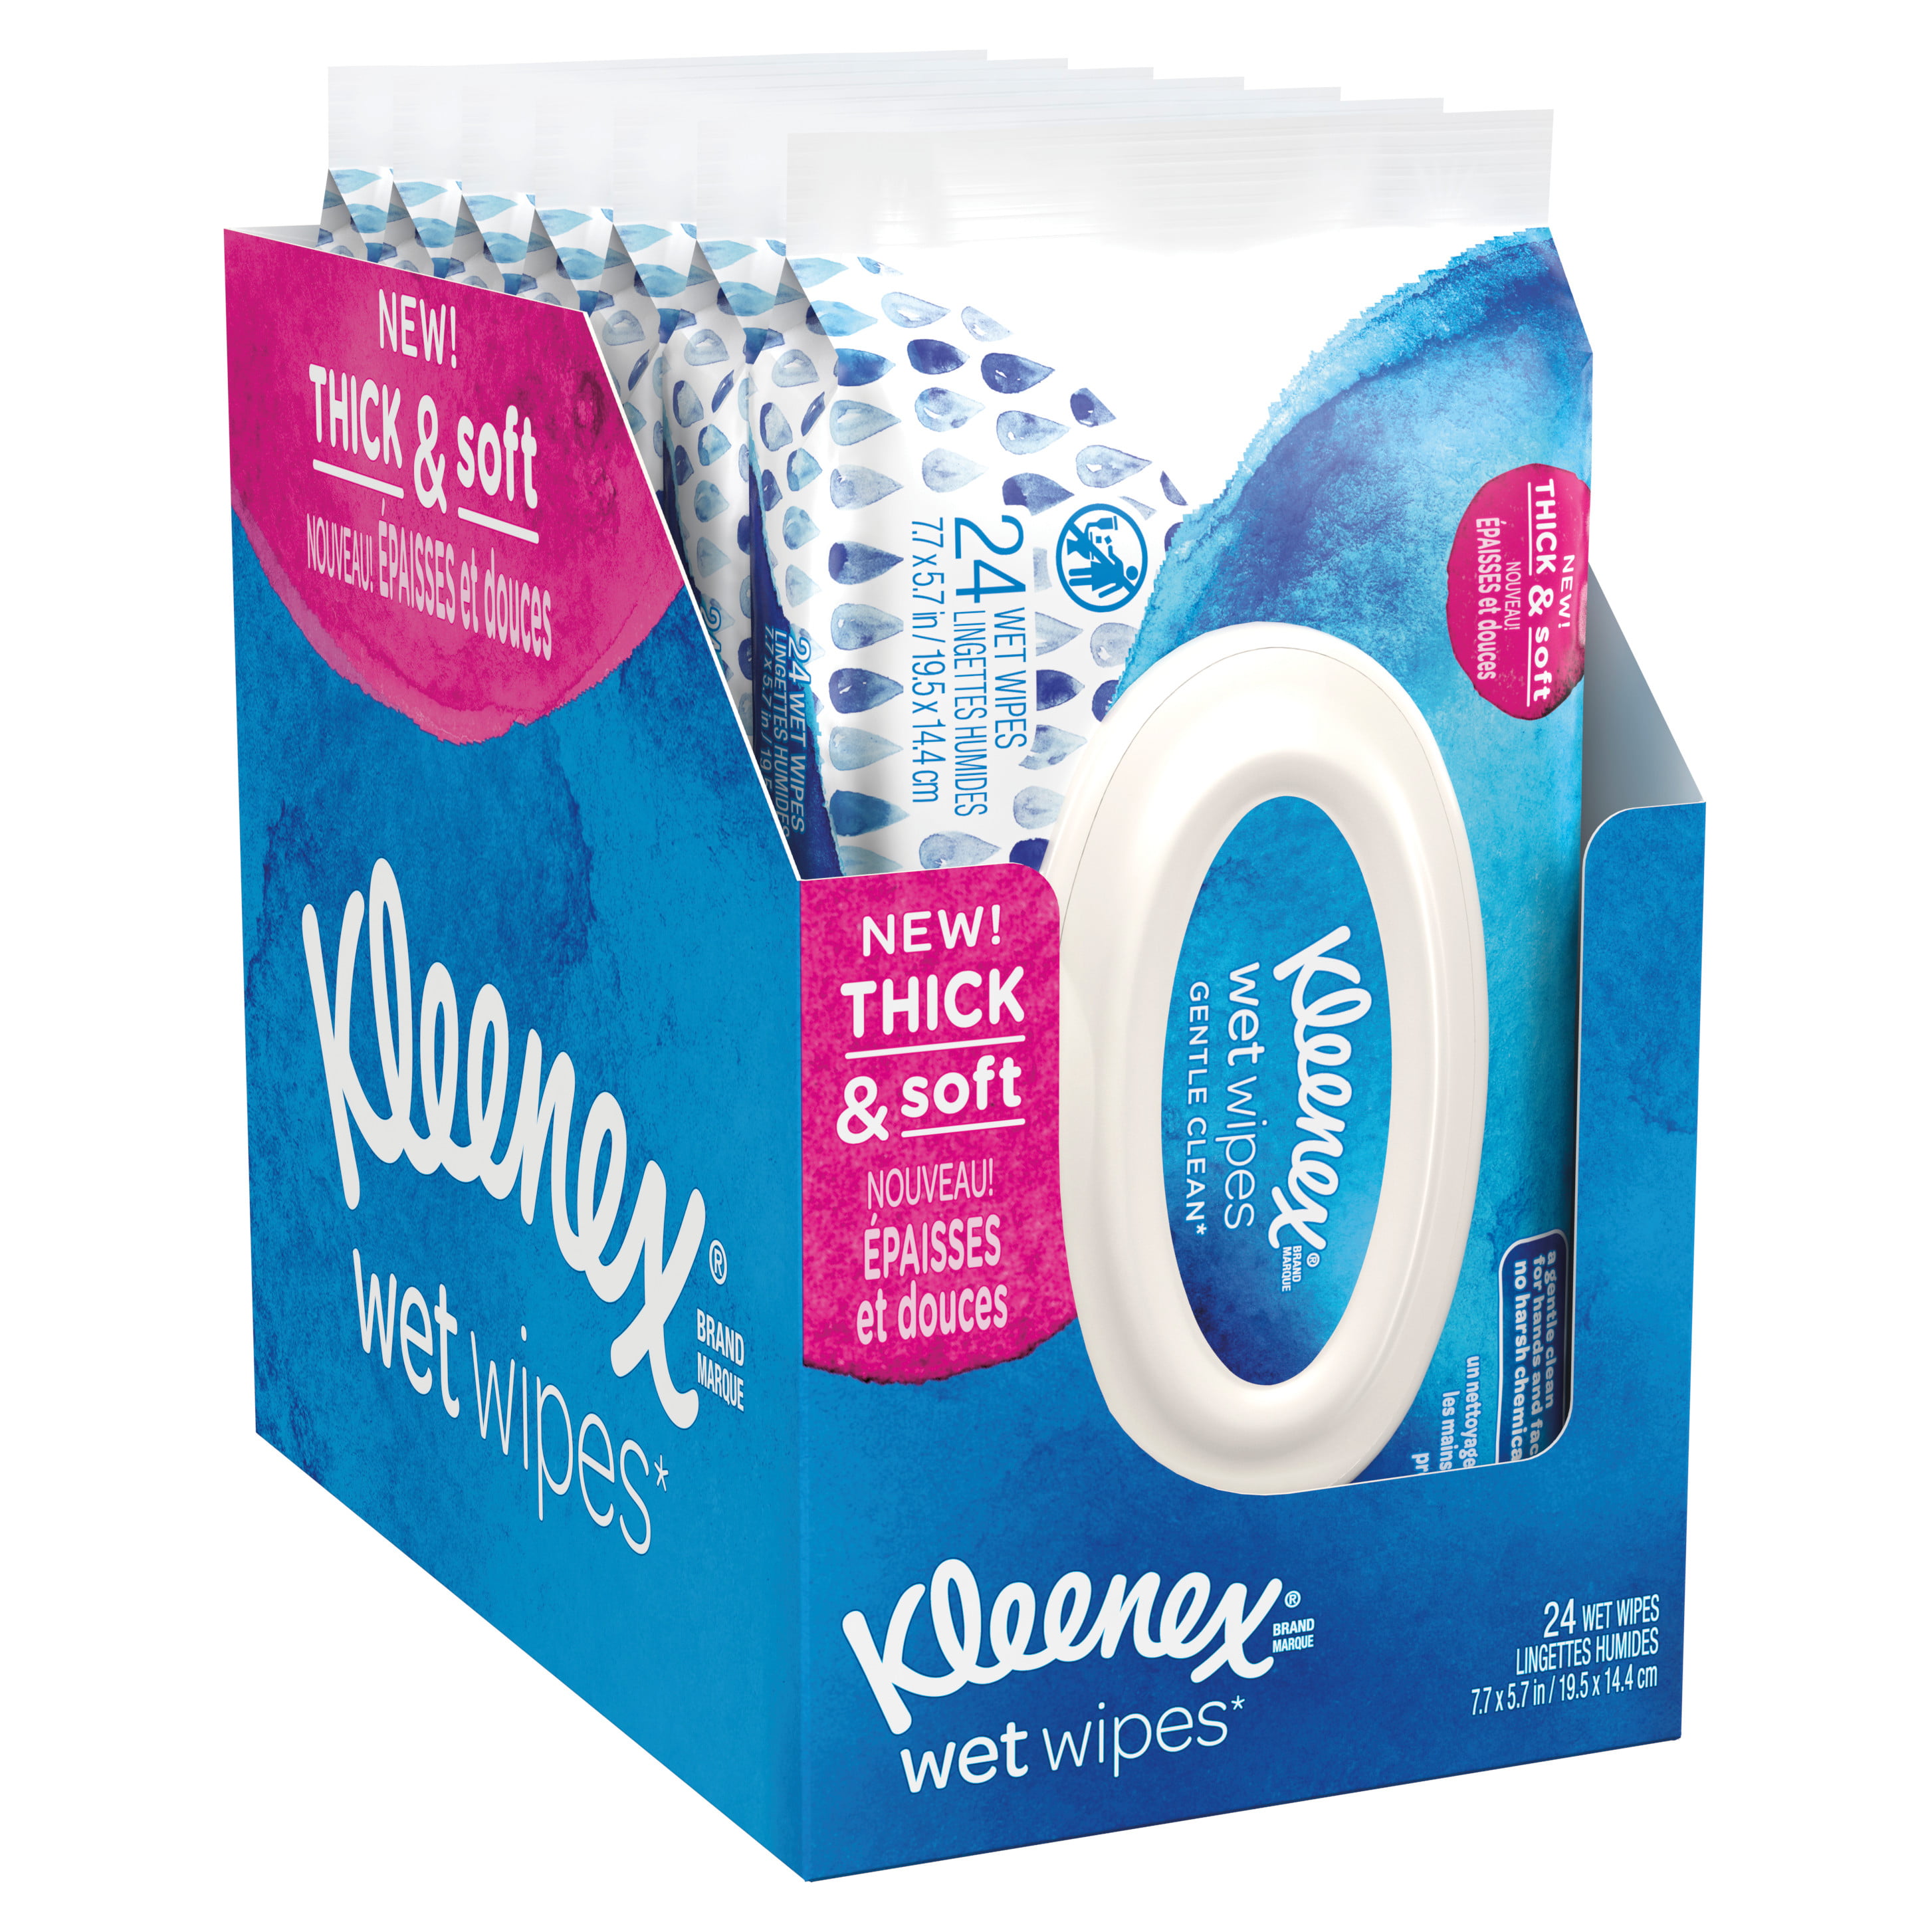 Packaging May Vary 1 Box of 300 Individually Wrapped Wipes Kleenex Wet Wipes Gentle Clean for Hands and Face